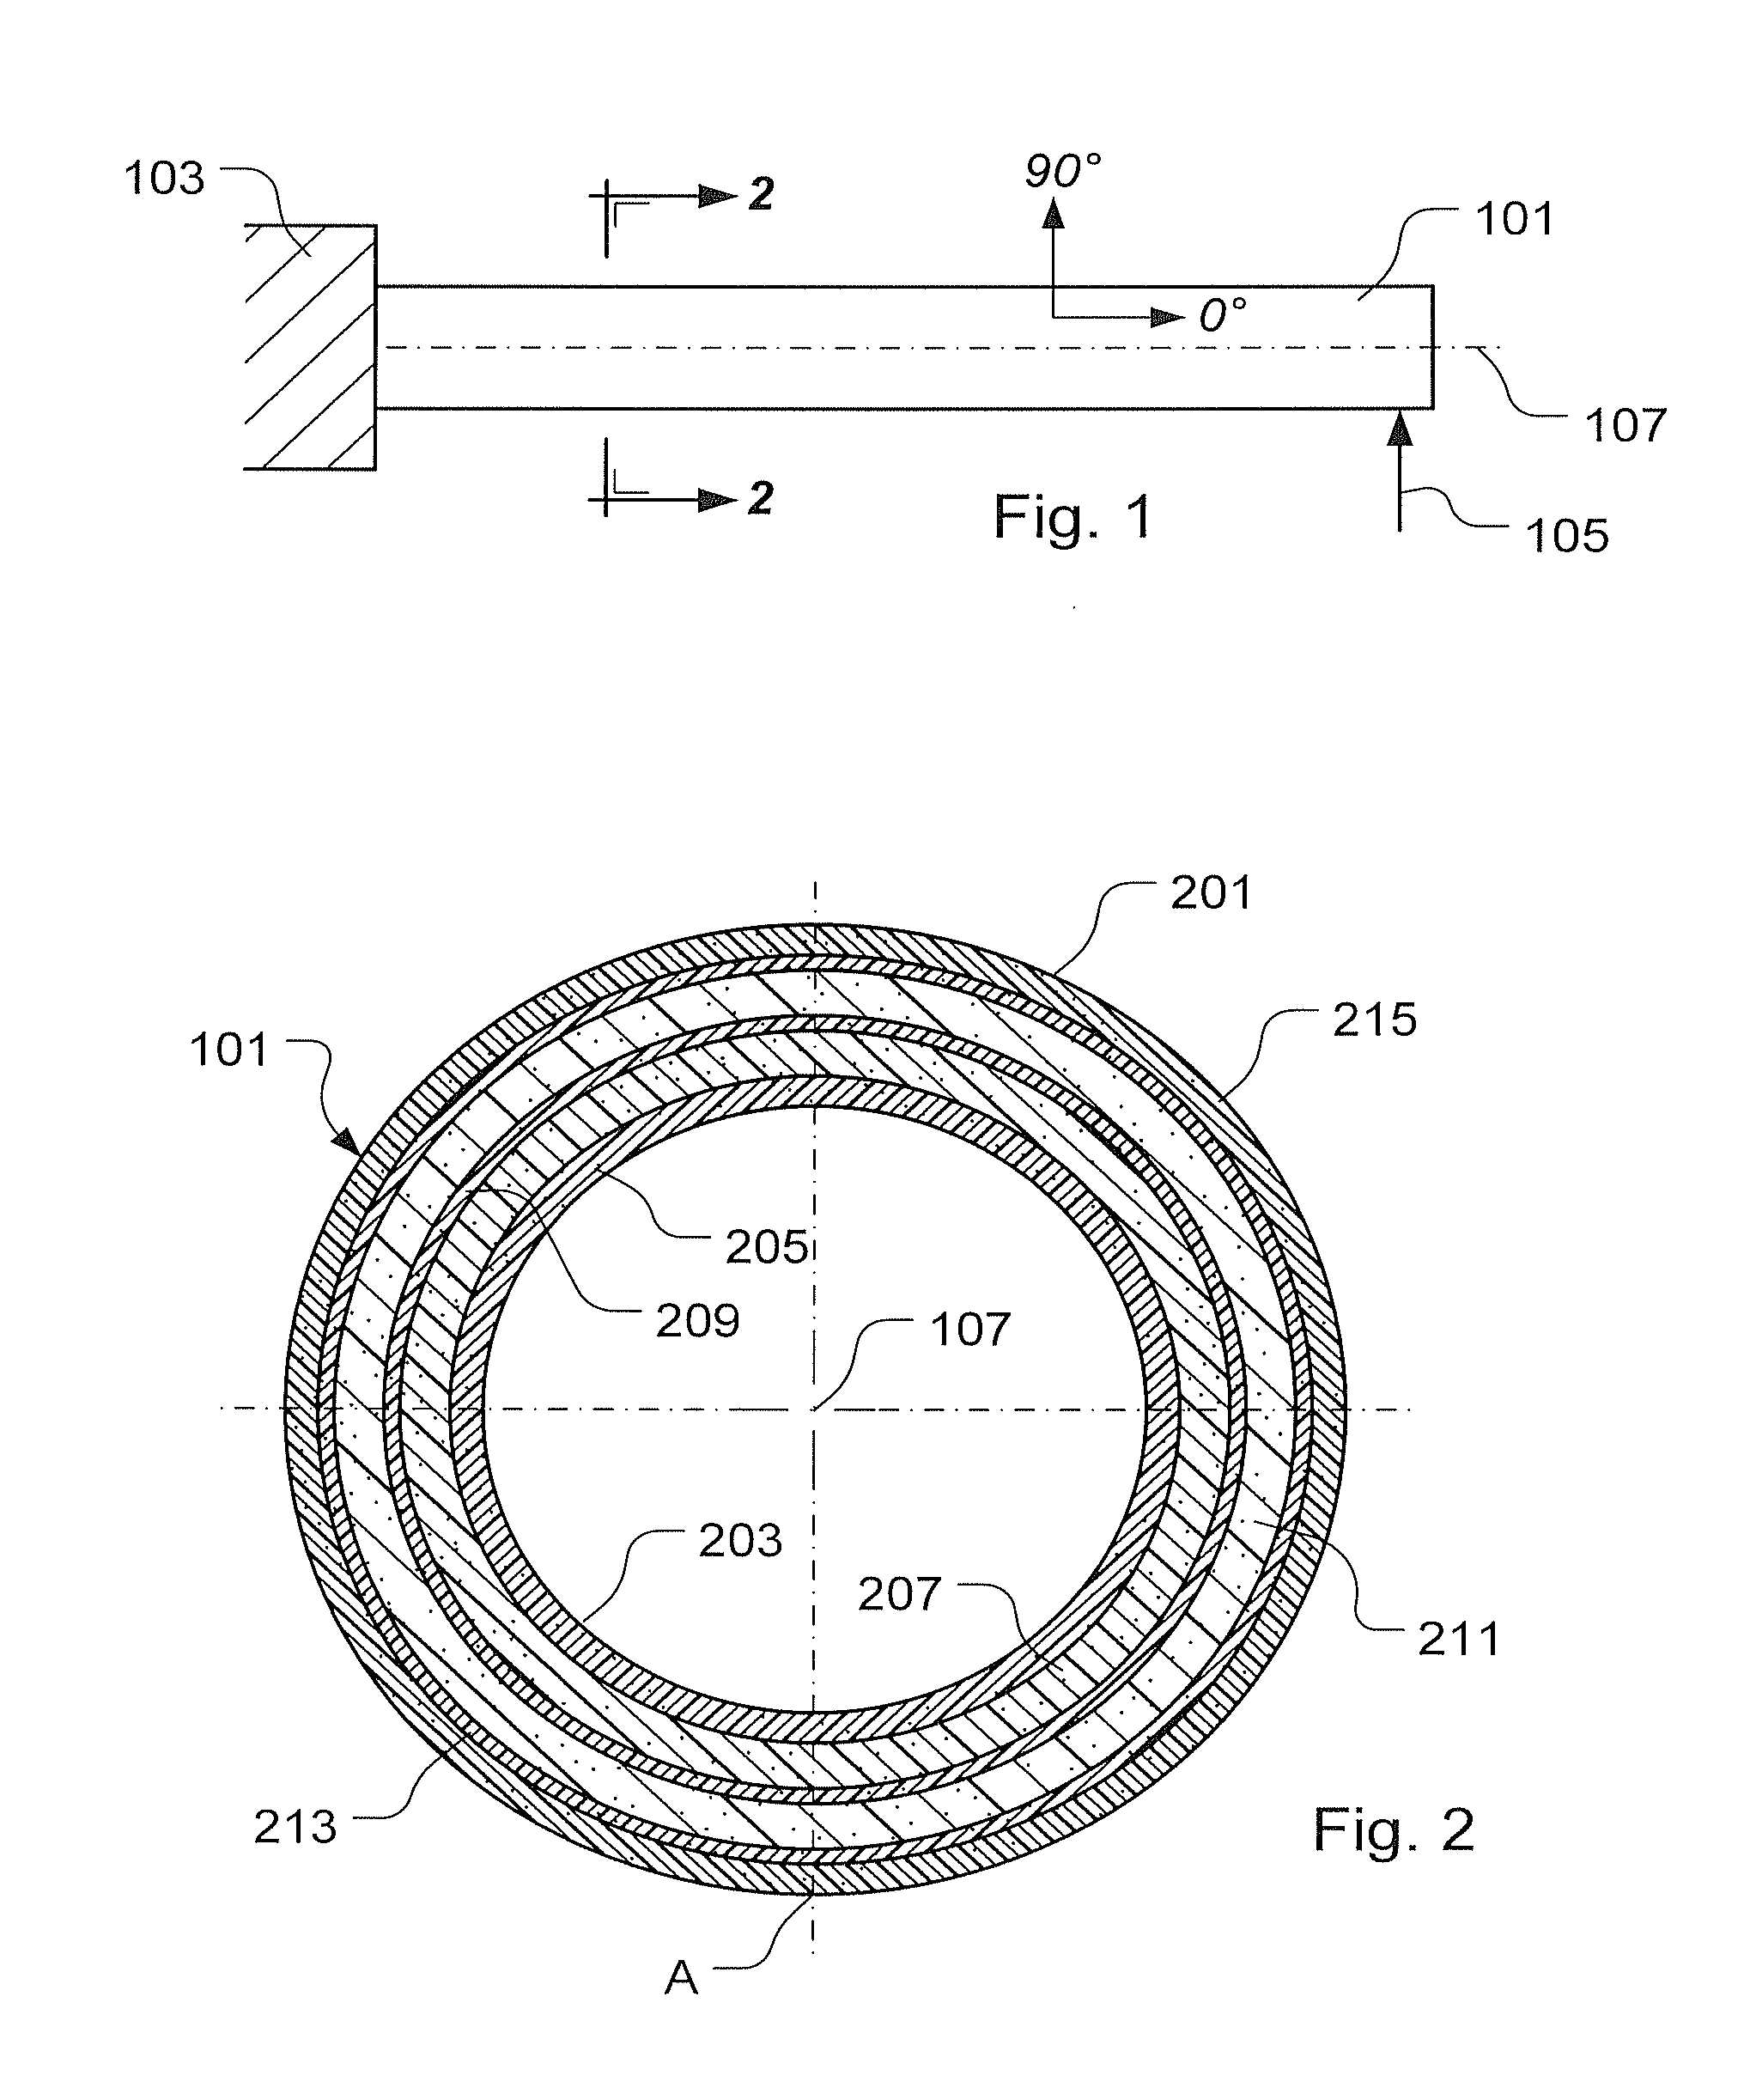 Fiber-reinforced, composite, structural member exhibiting non-linear strain-to-failure and method of making same